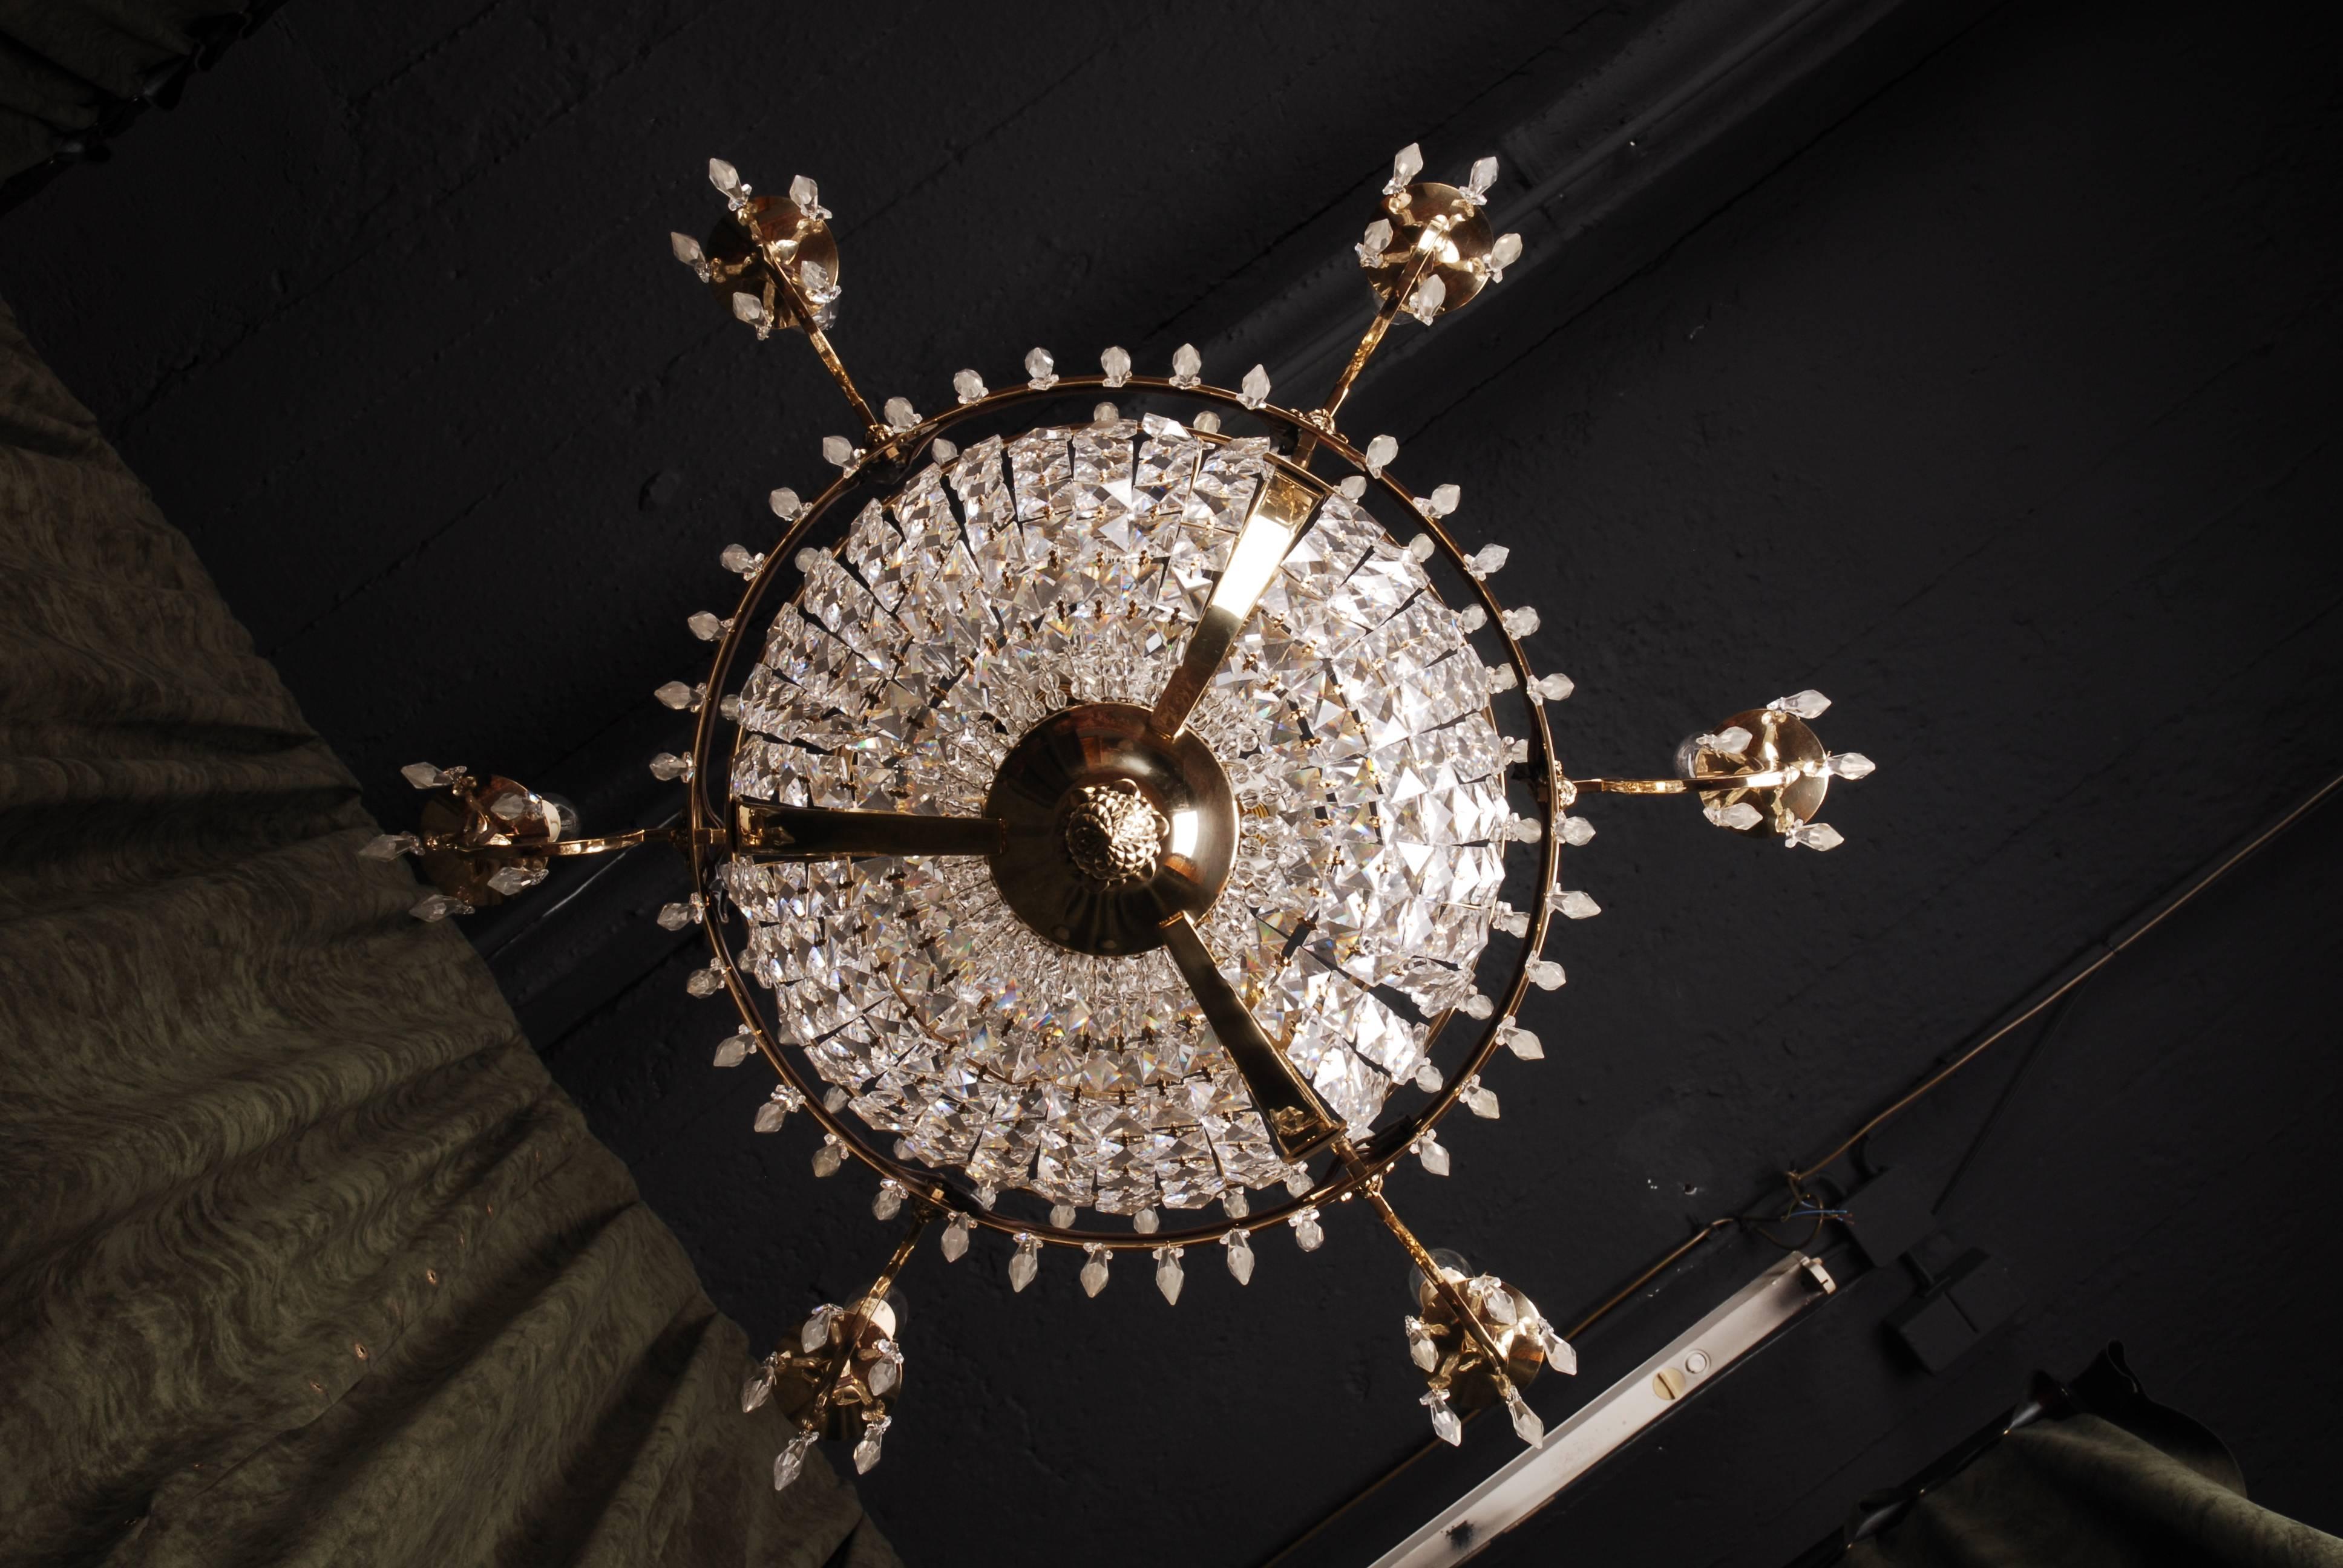 Polished 20th Century Classicist Style Swedish Empire Ceiling Candelabra